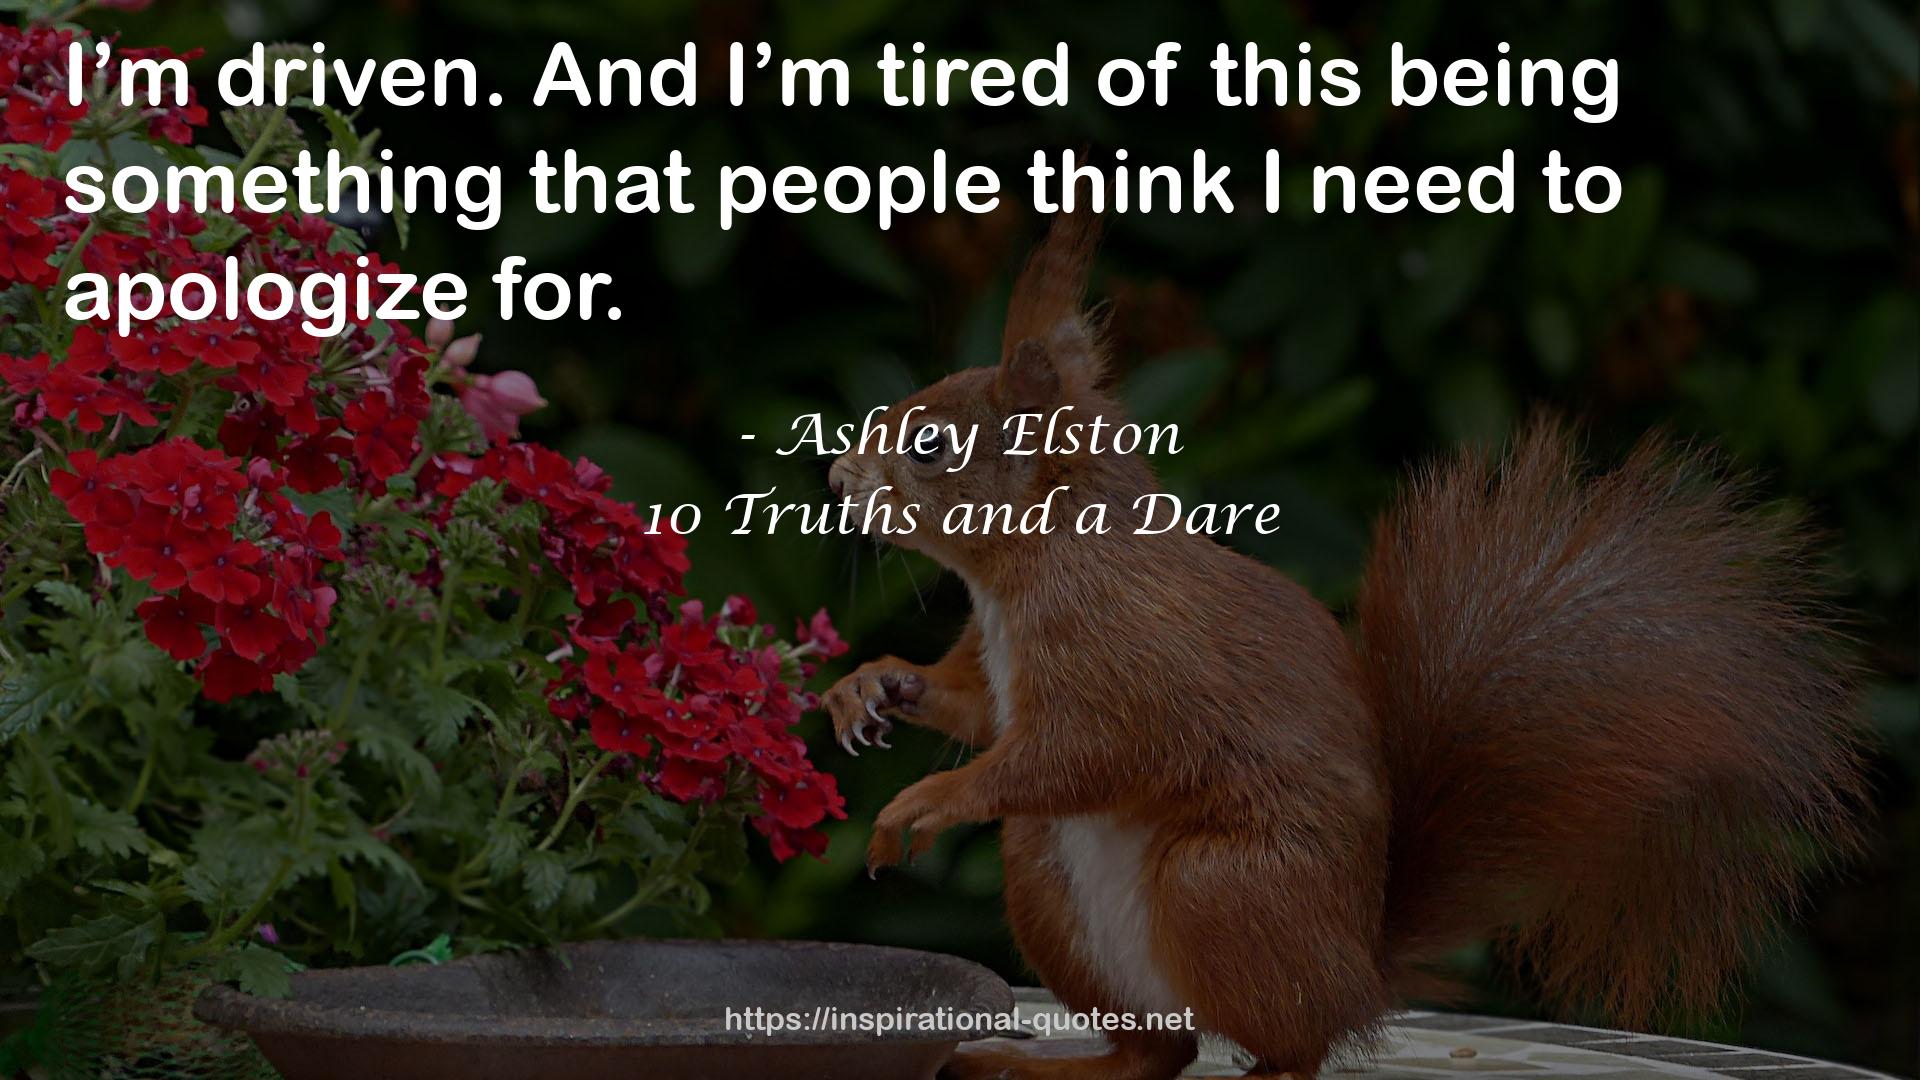 10 Truths and a Dare QUOTES